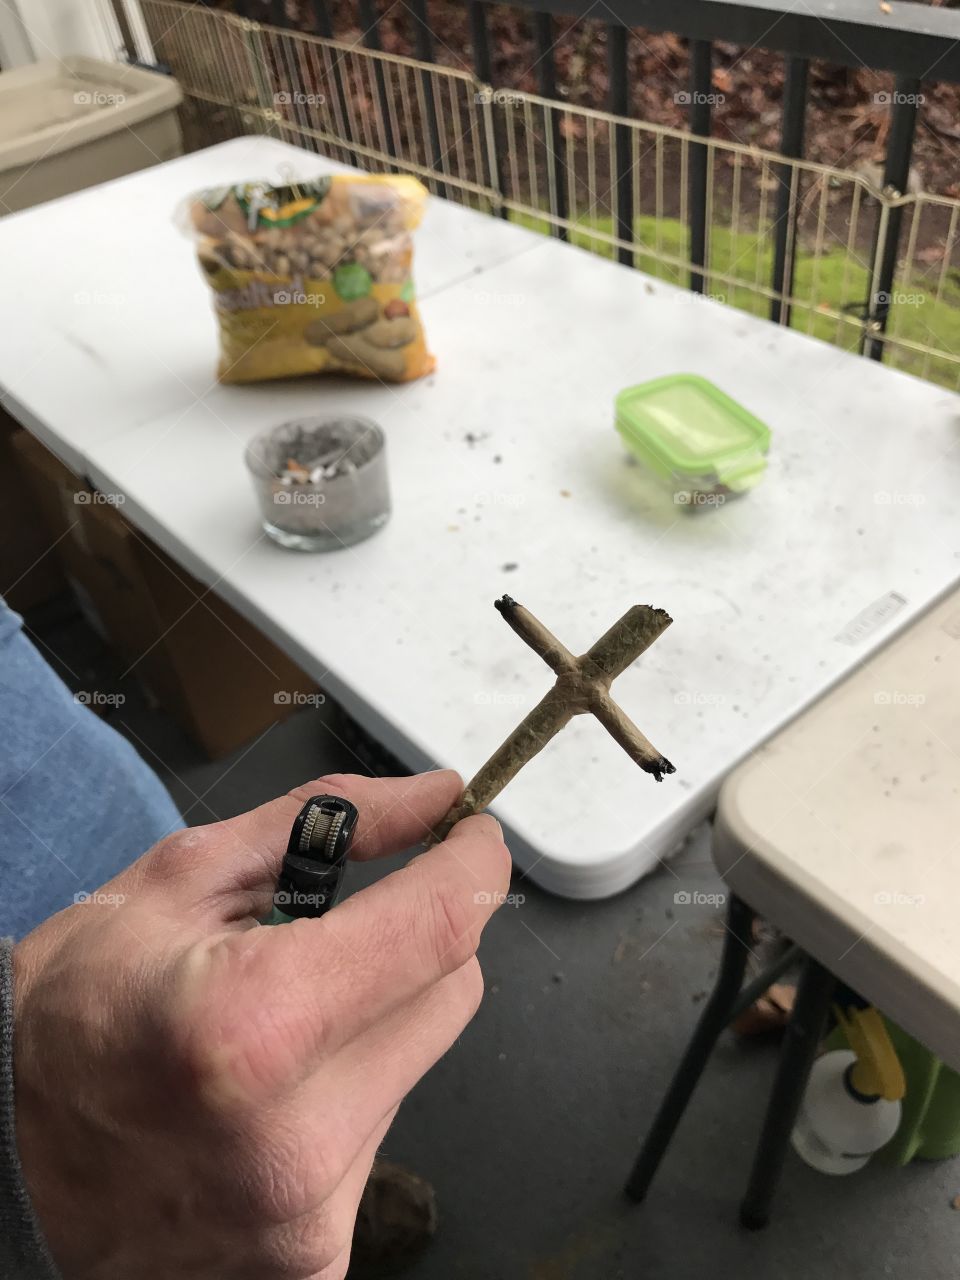 This is an actual crossjoint a very good friend of mine rolled, just like from that movie 'Pineapple Express' Very good bud...
